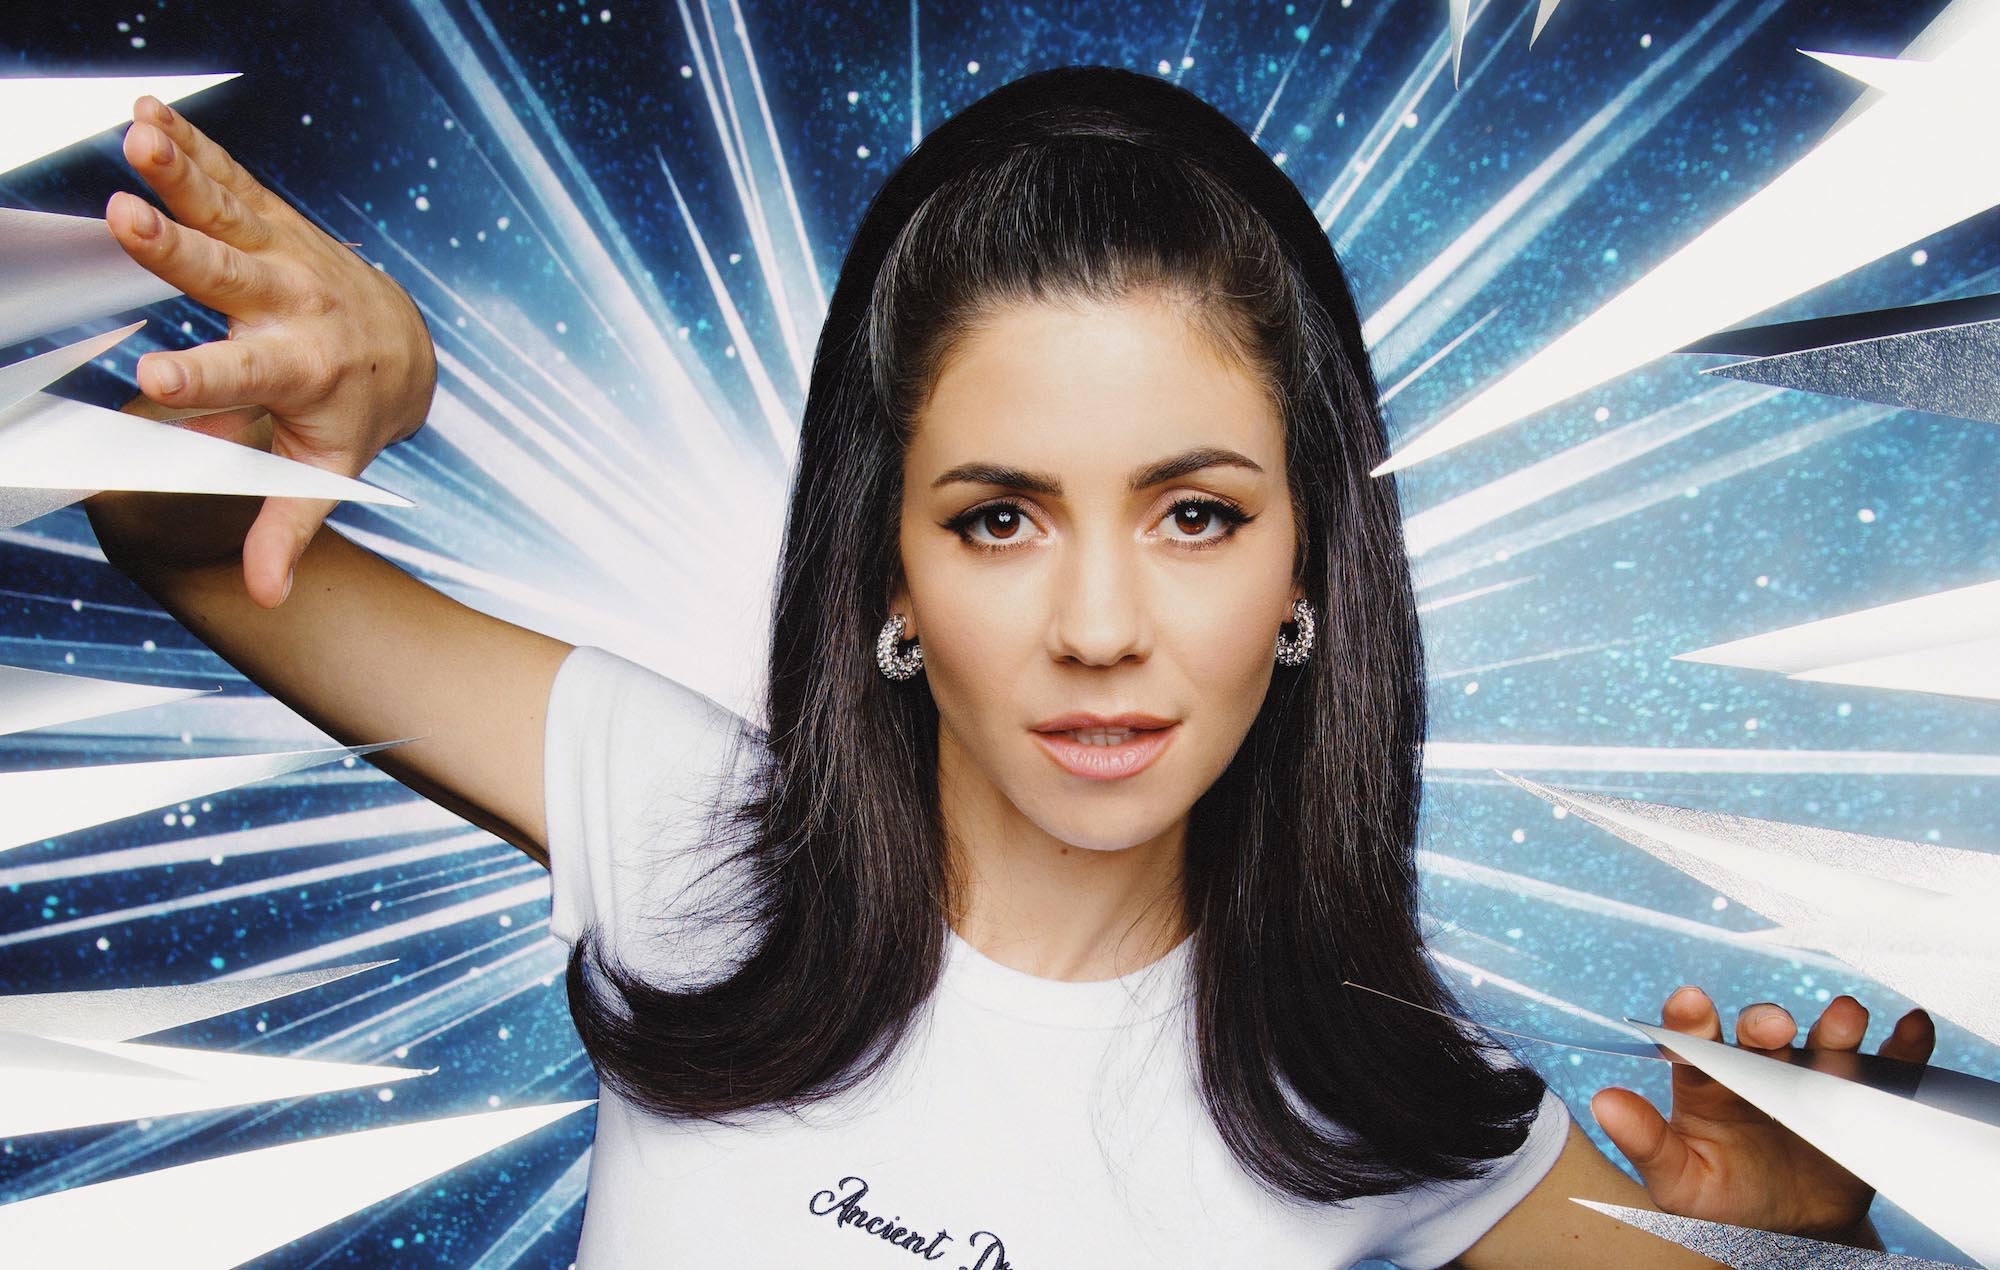 Five things we learned from our In Conversation video chat with Marina